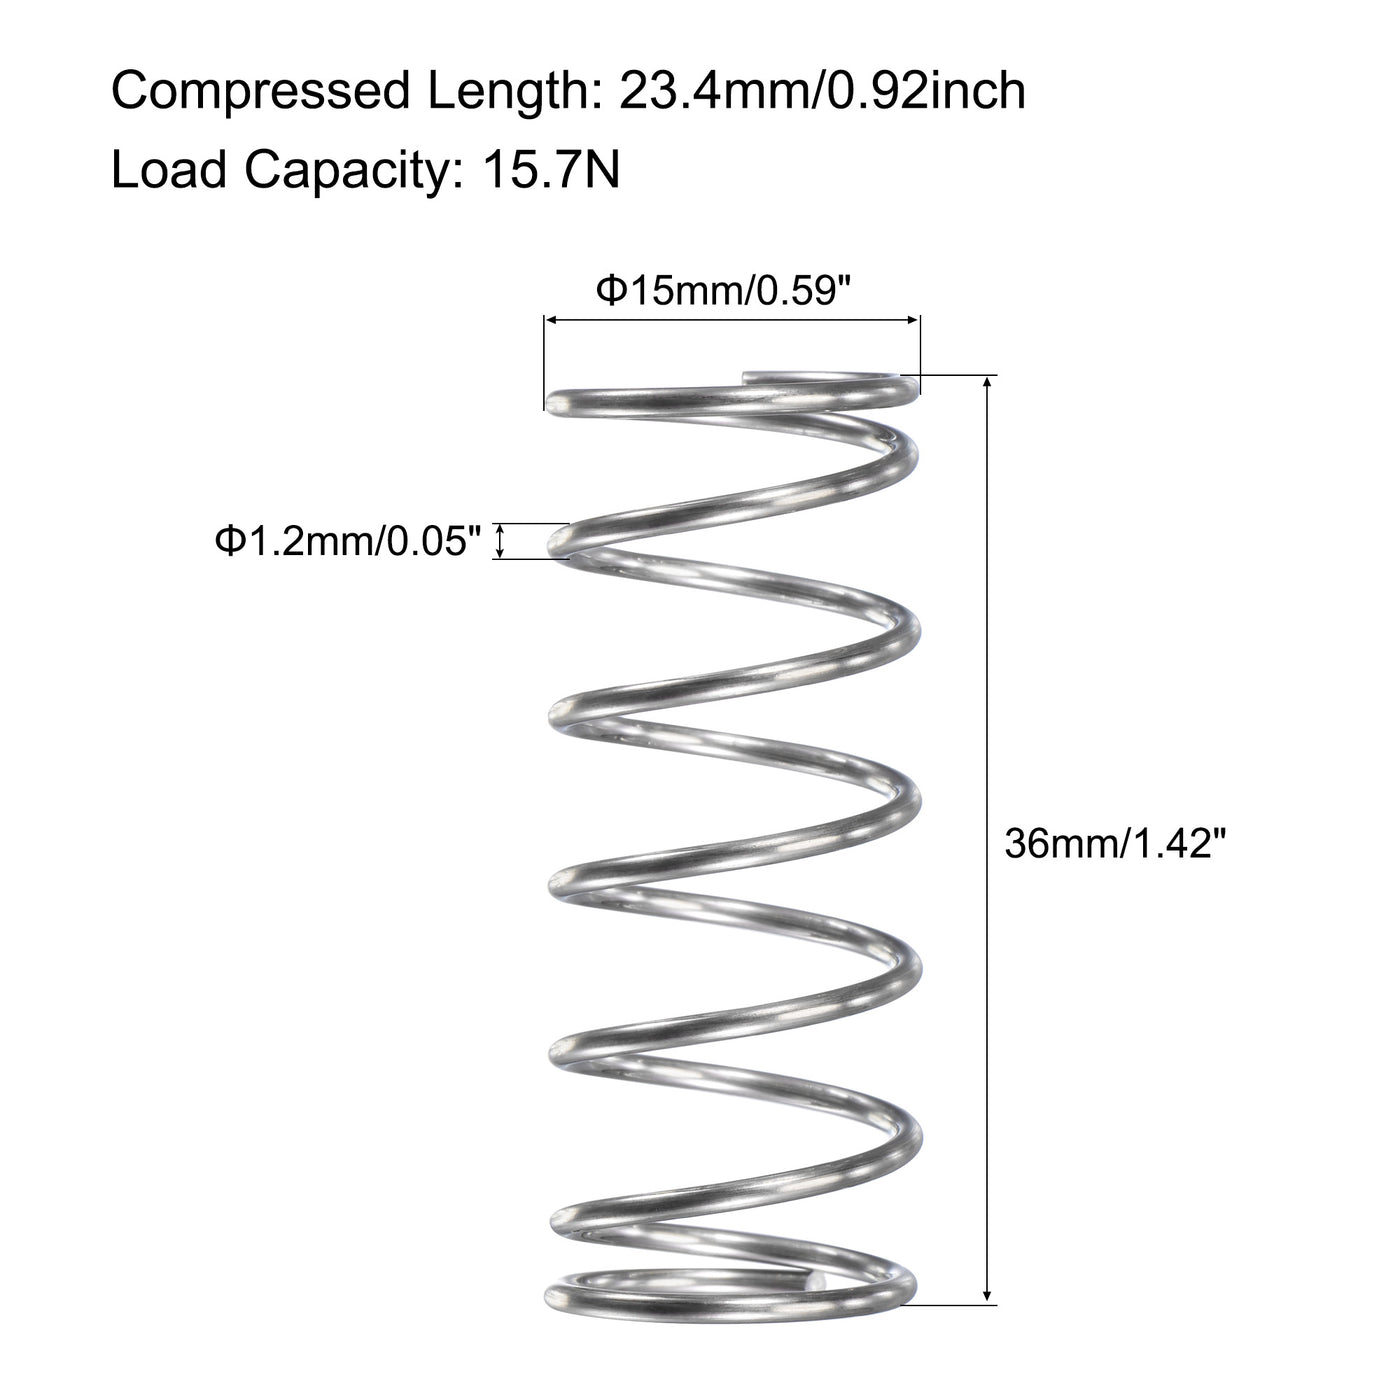 uxcell Uxcell 15mmx1.2mmx36mm 304 Stainless Steel Compression Spring 15.7N Load Capacity 5pcs